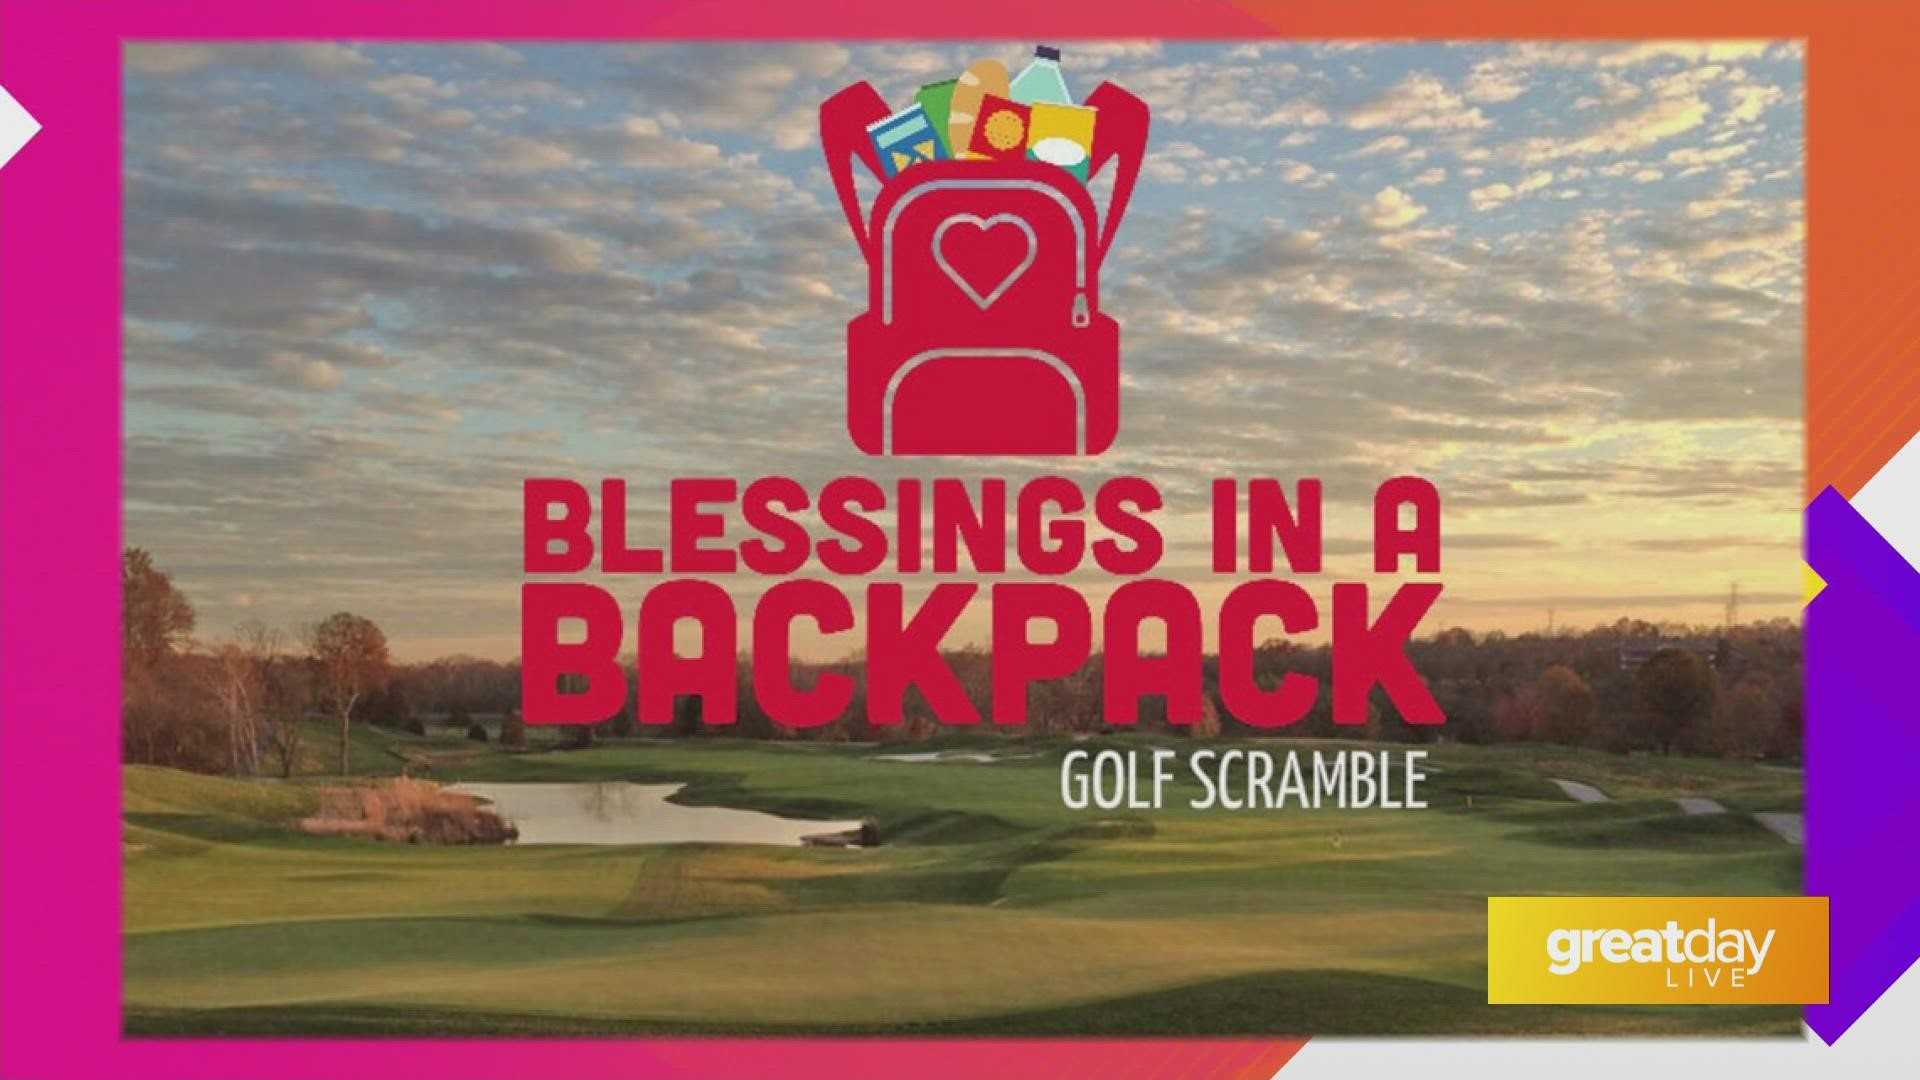 The Blessings in a Backpack Golf Scramble is August 16th, 2021 Wildwood Country Club. To register, visit louisville.blessingsinabackpack.org.